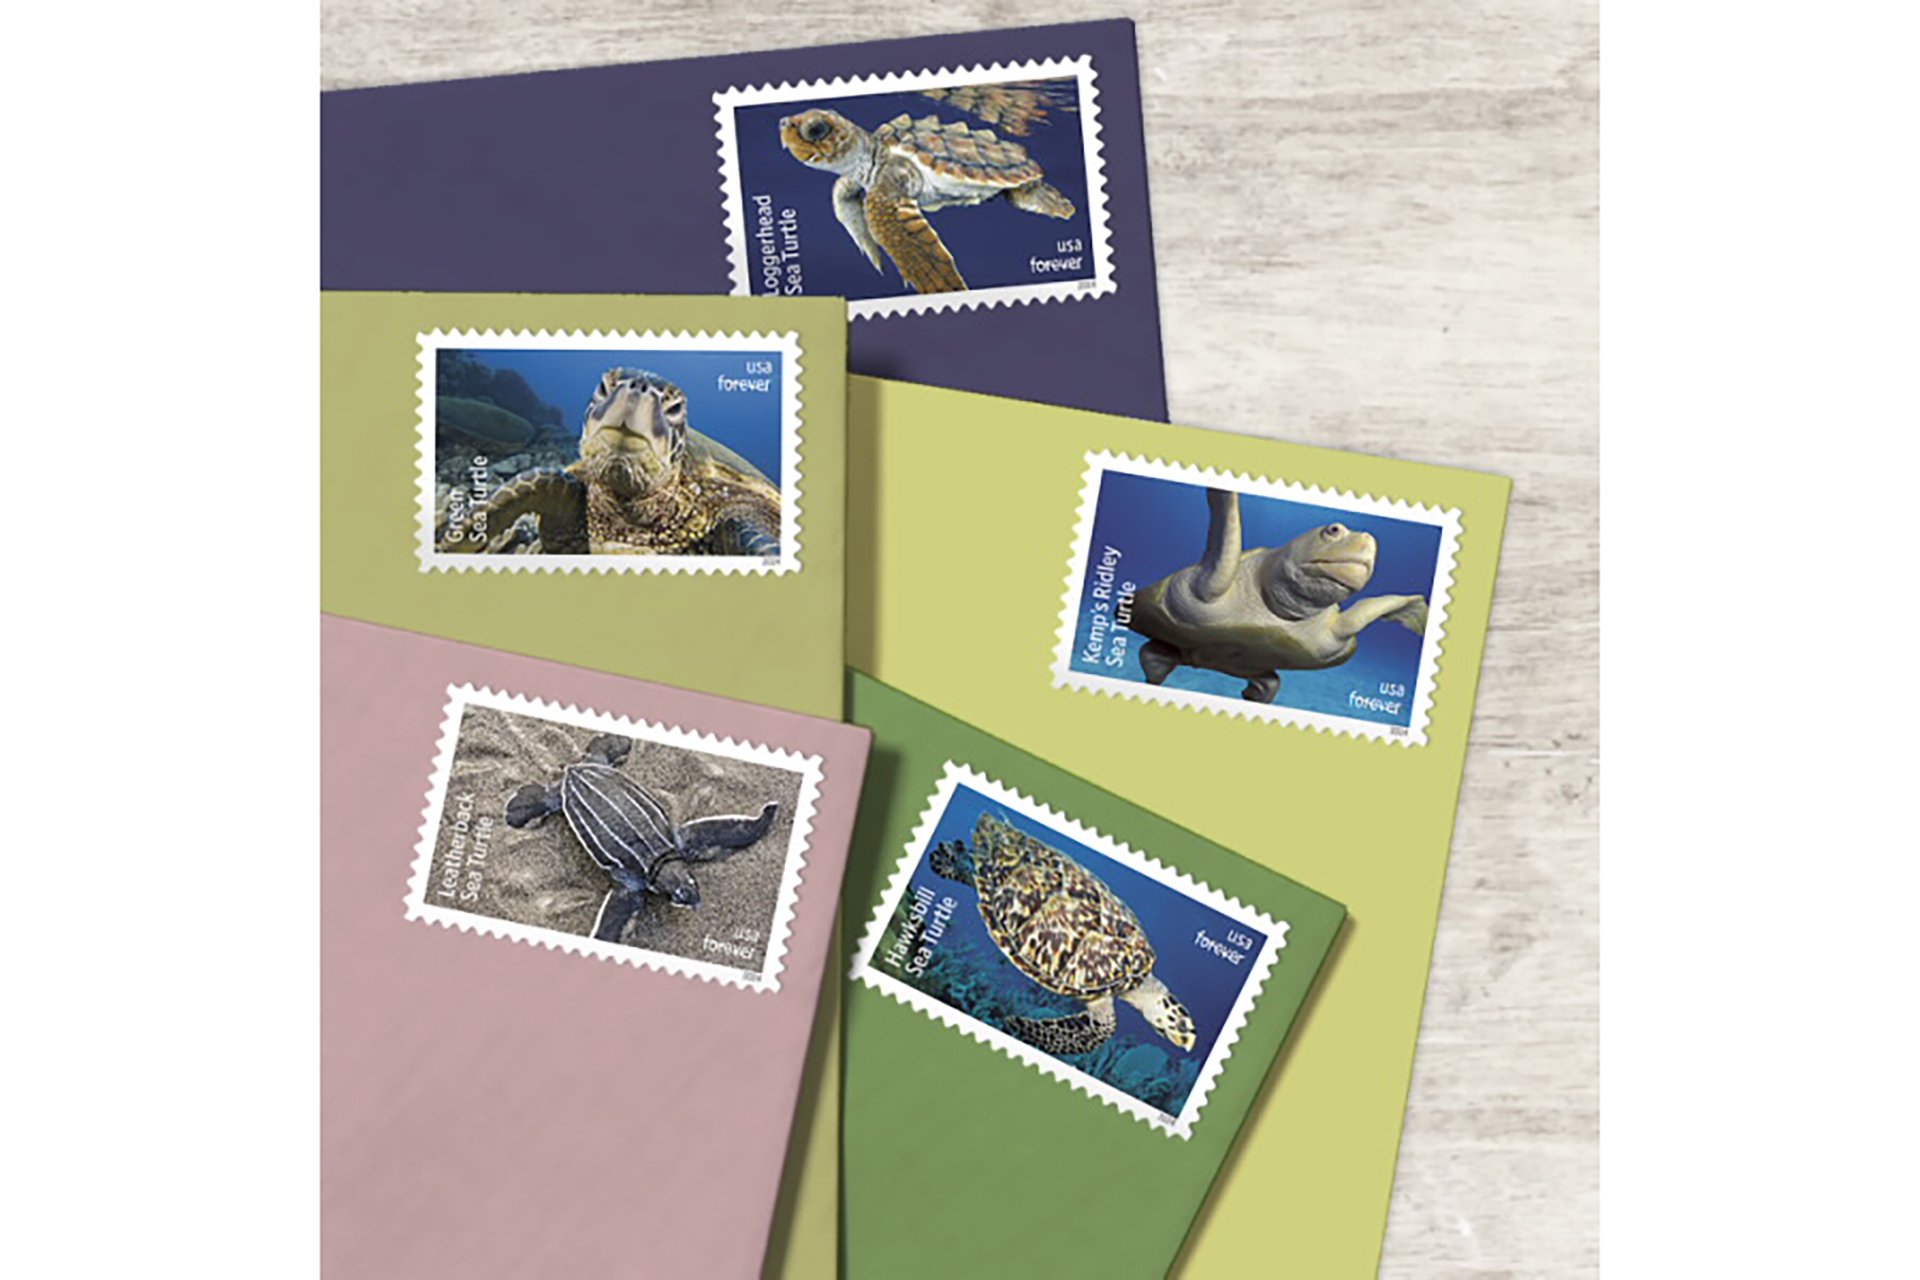 Protect Sea Turtles stamps on five colorful envelopes